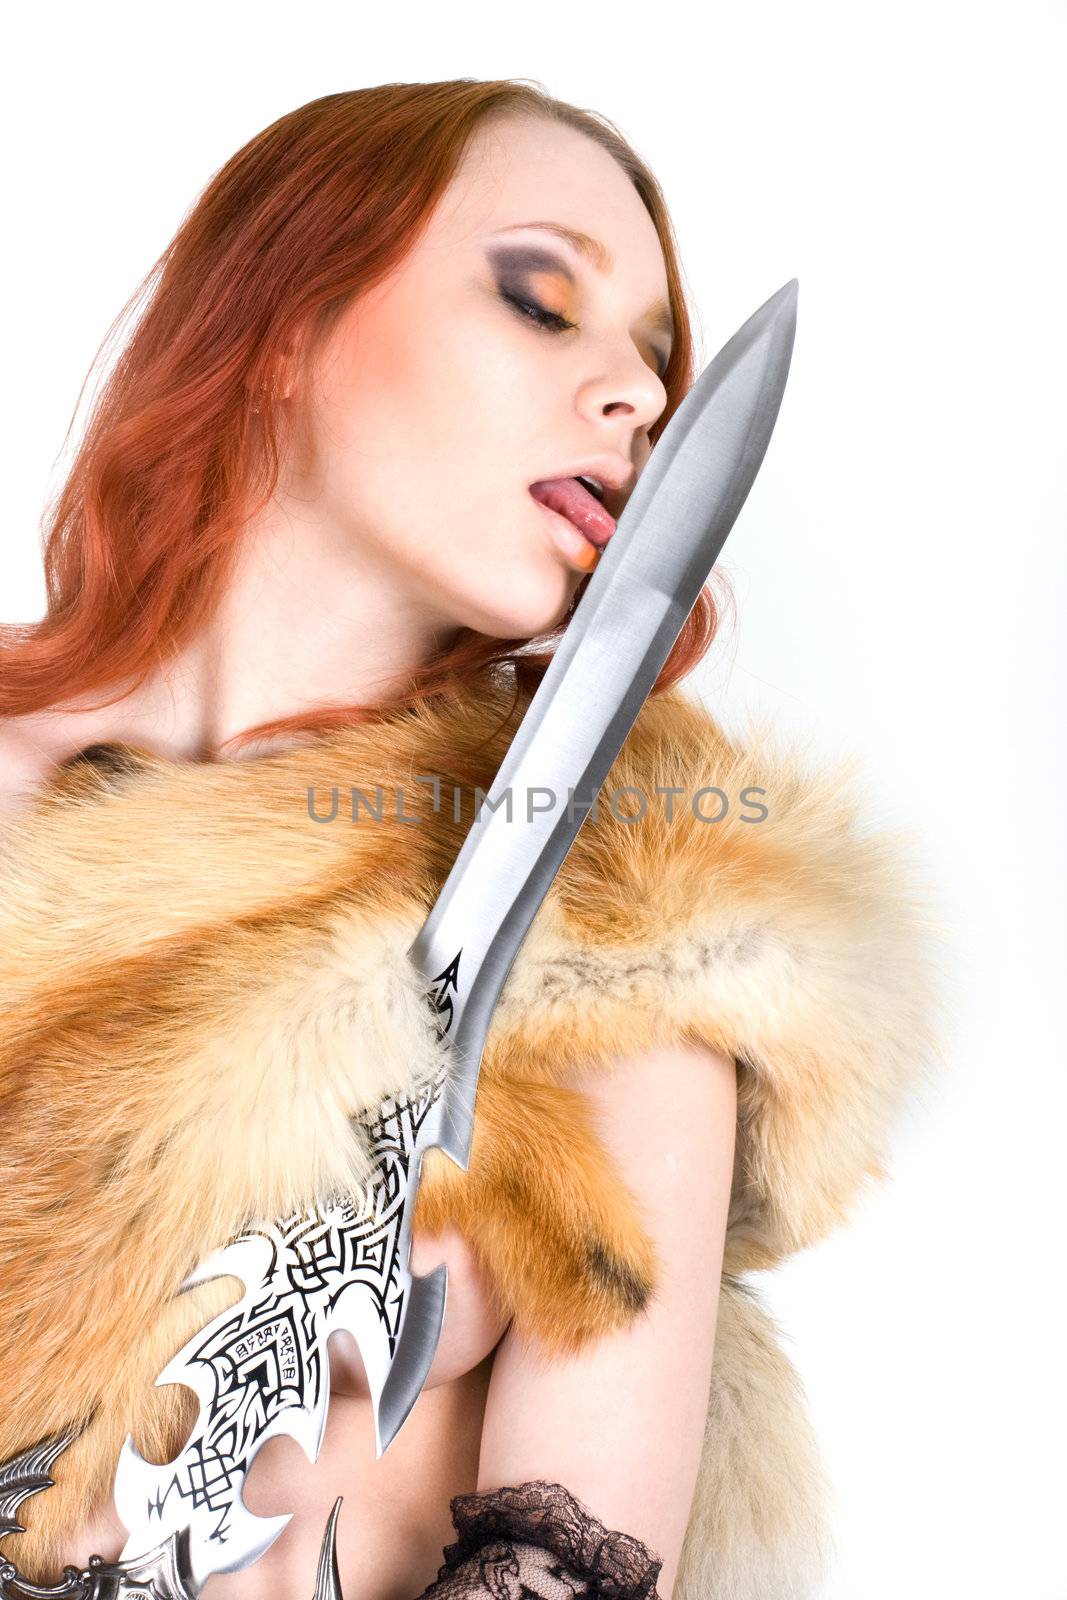 Young sexy redhair woman licking a sword by mihhailov